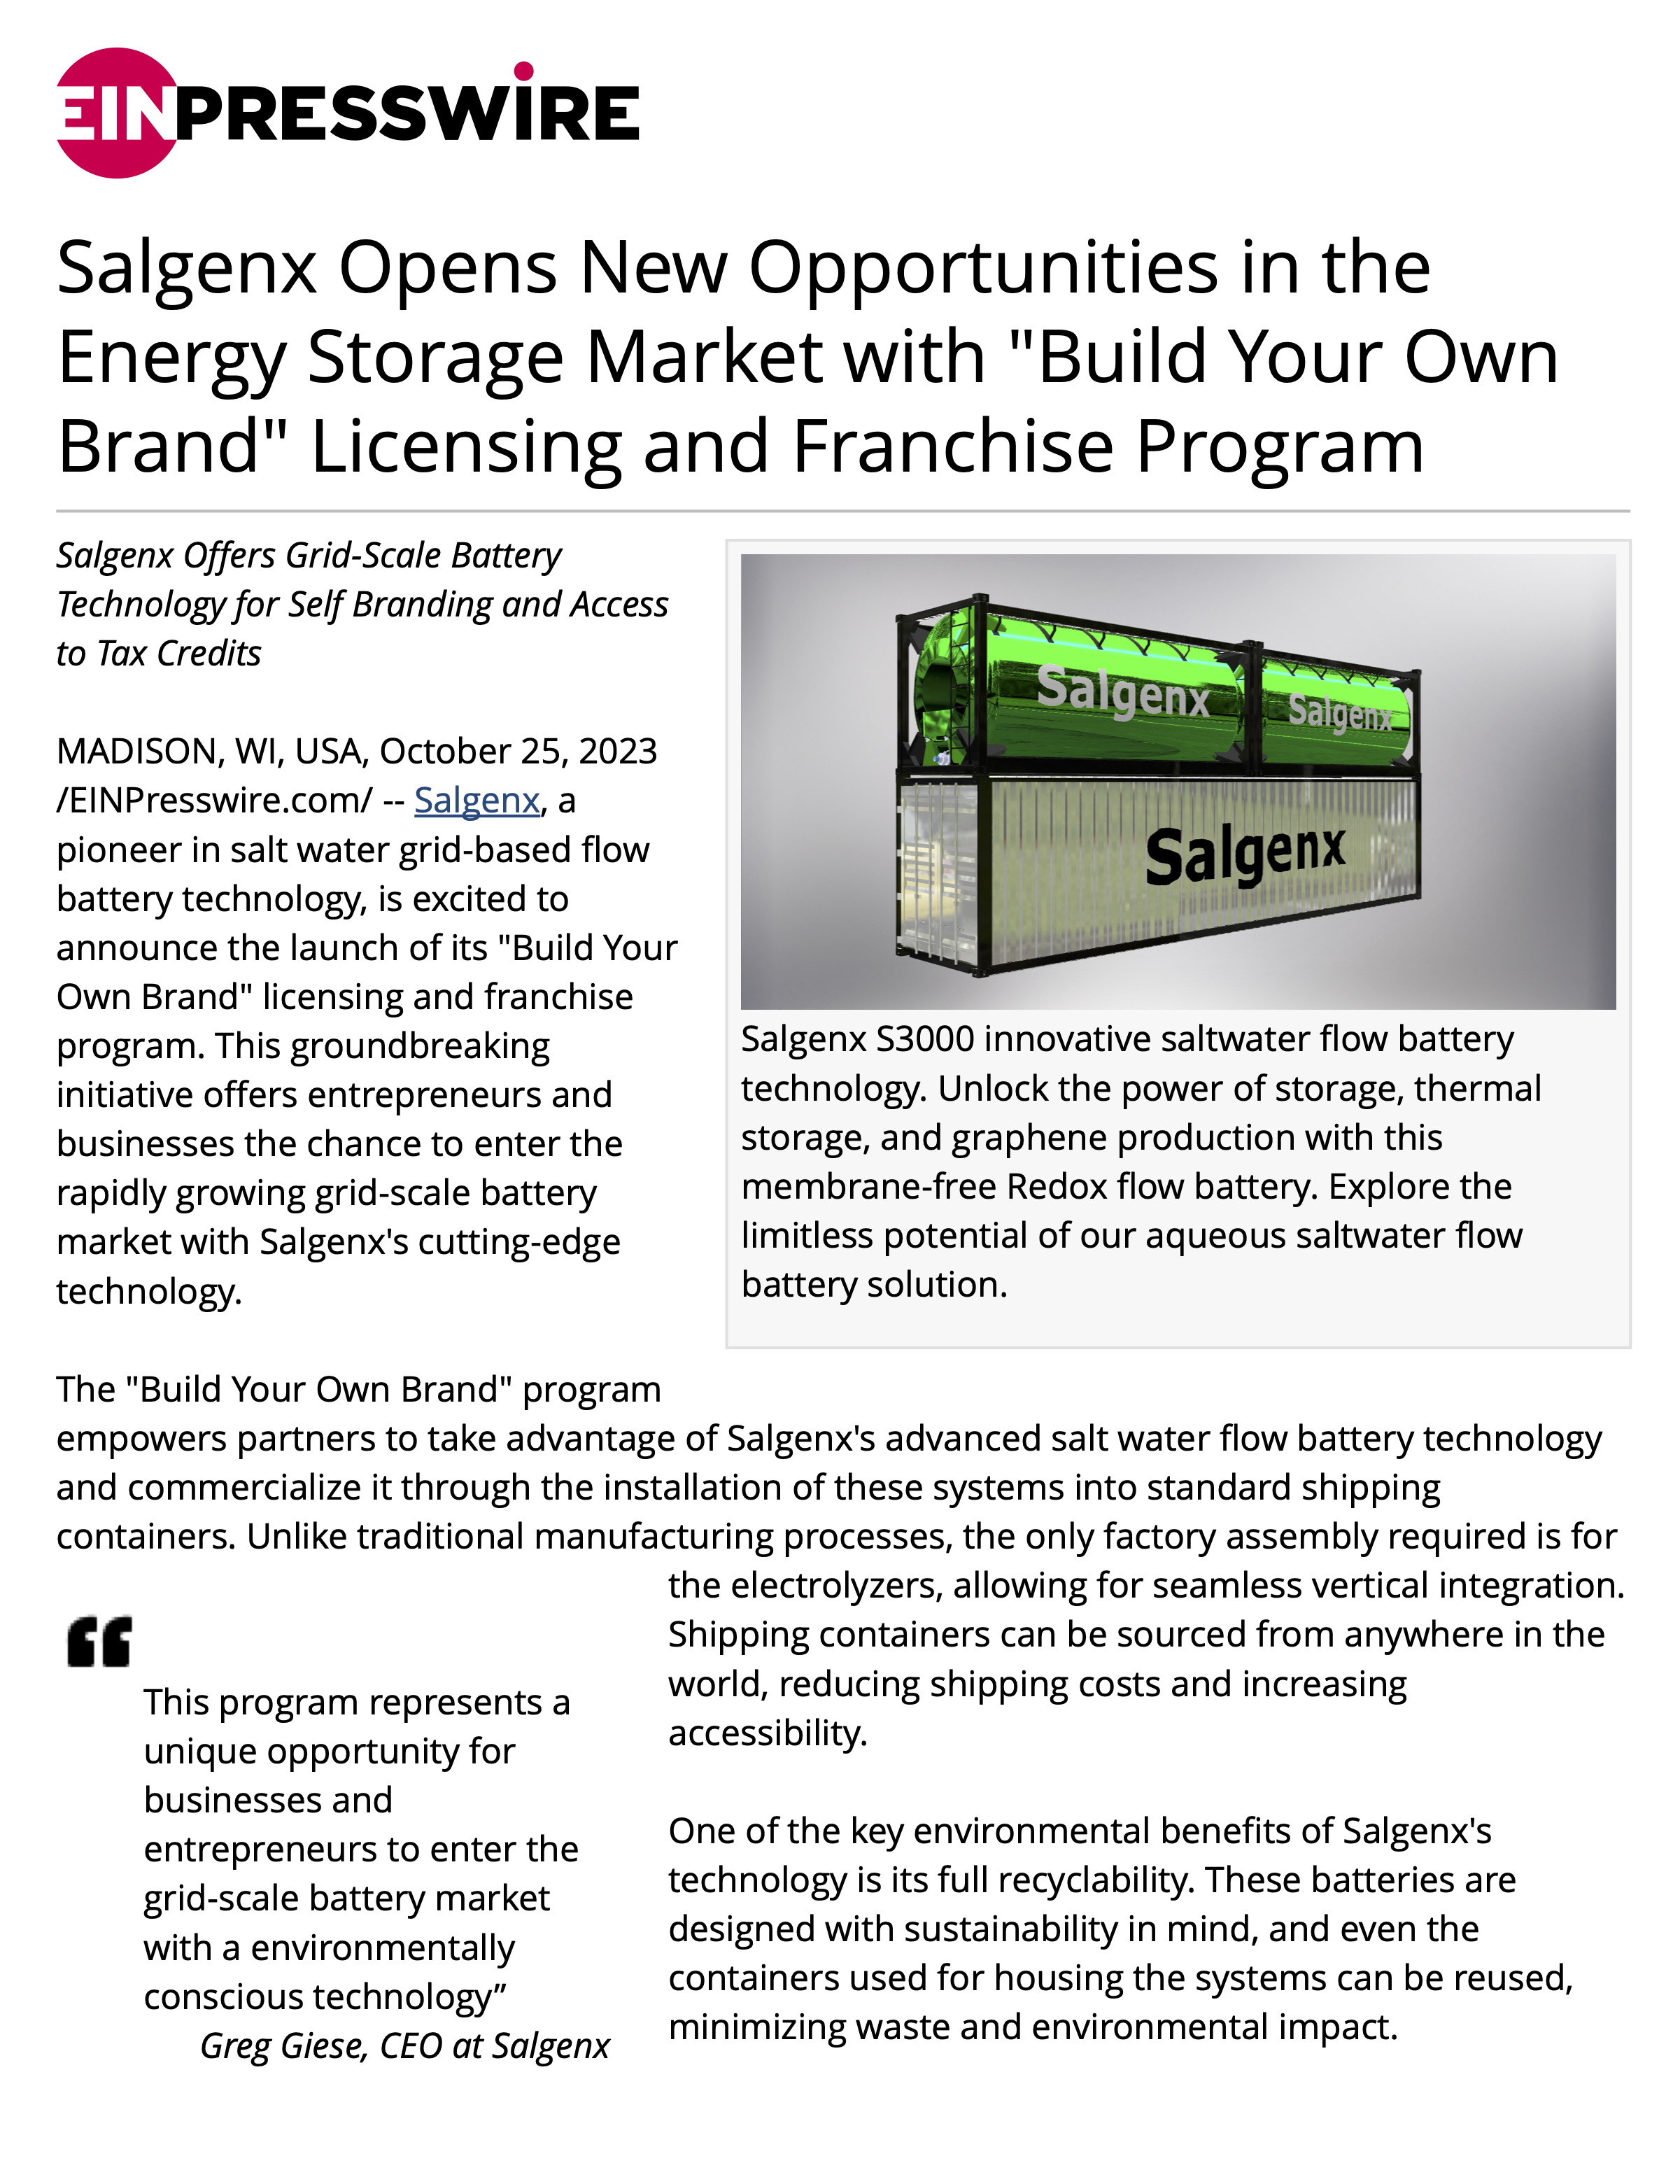 Salgenx Opens New Opportunities in the Energy Storage Market with Build Your Own Brand Licensing and Franchise Program